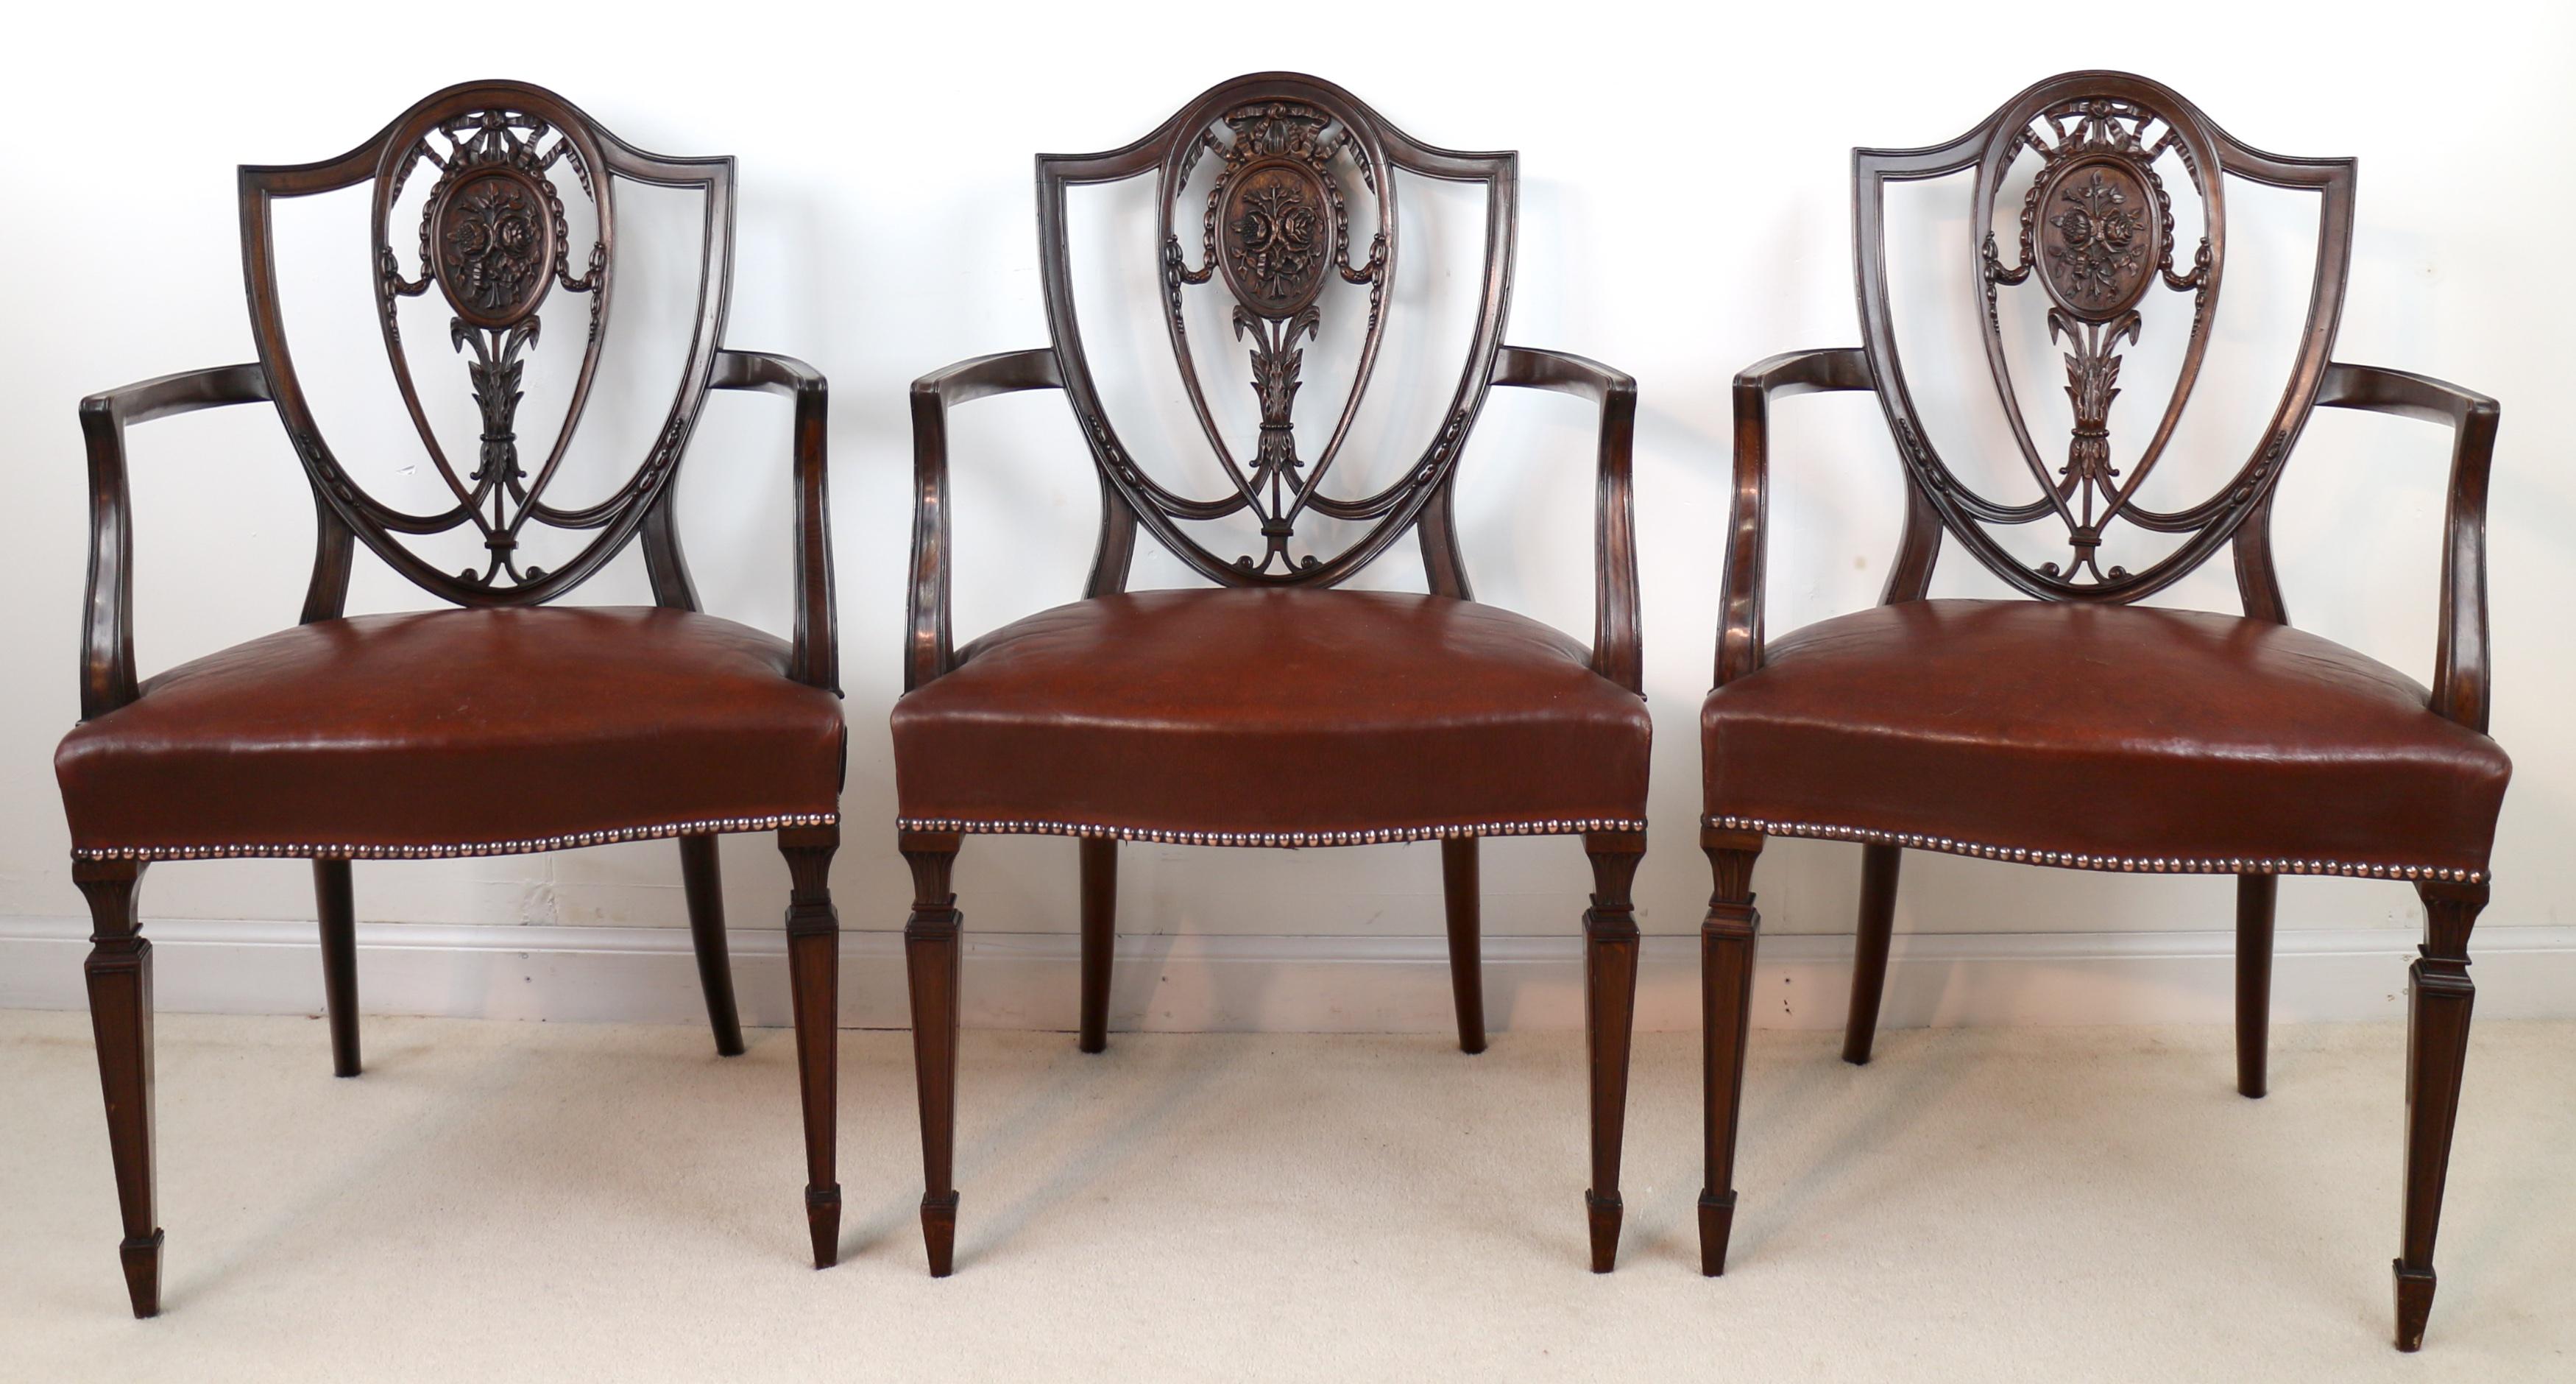 Set of 10 Antique English Victorian Hepplewhite Design Carver Dining Chairs 12